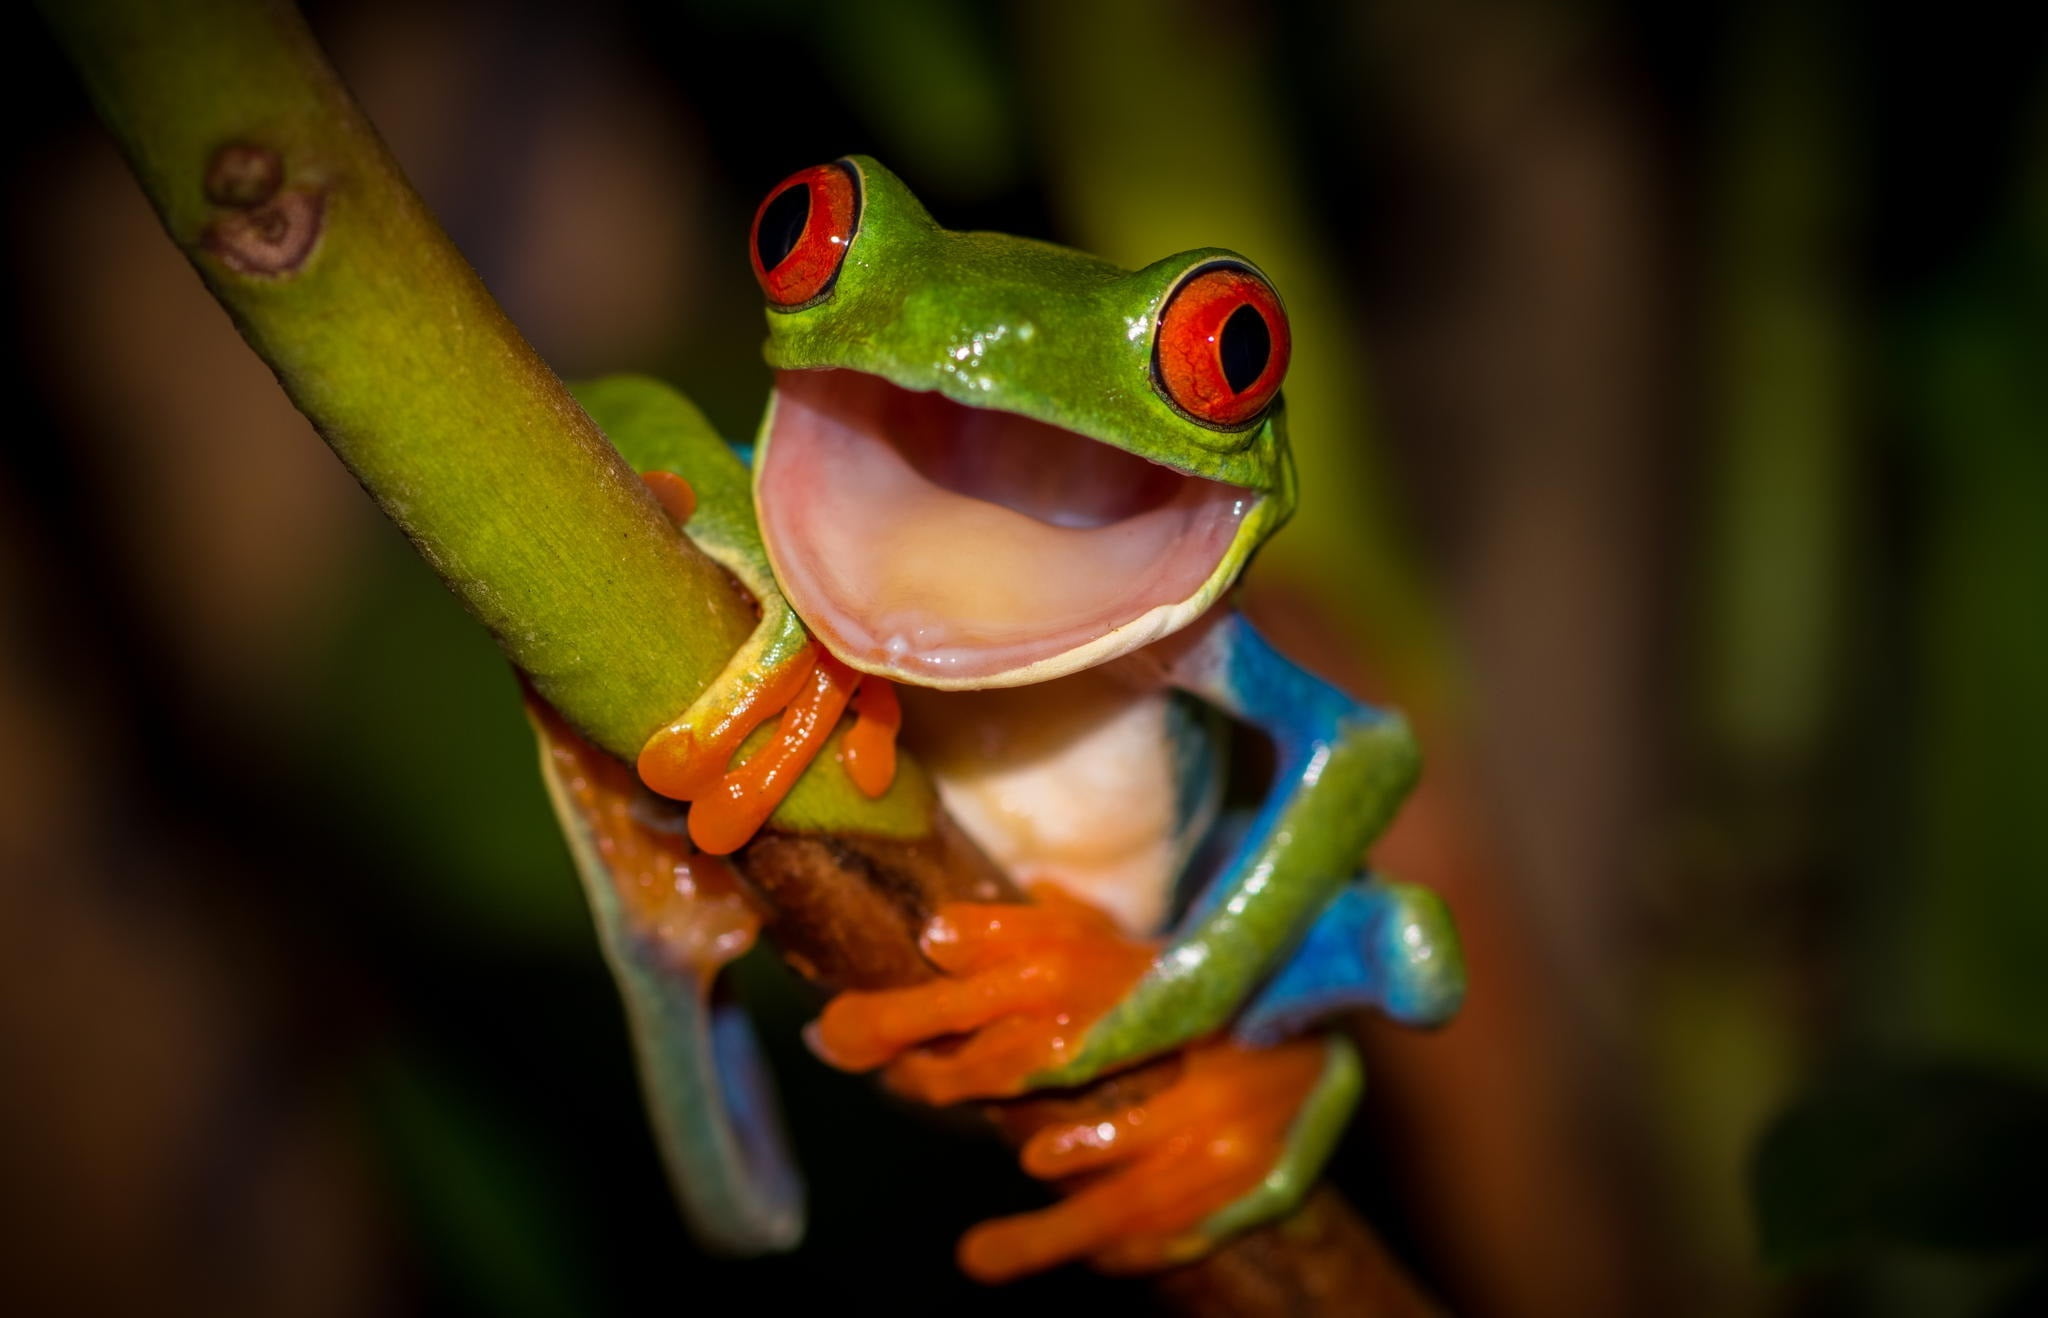 green and blue frog, legs, mouth, stem, orange, red eyes, colorful